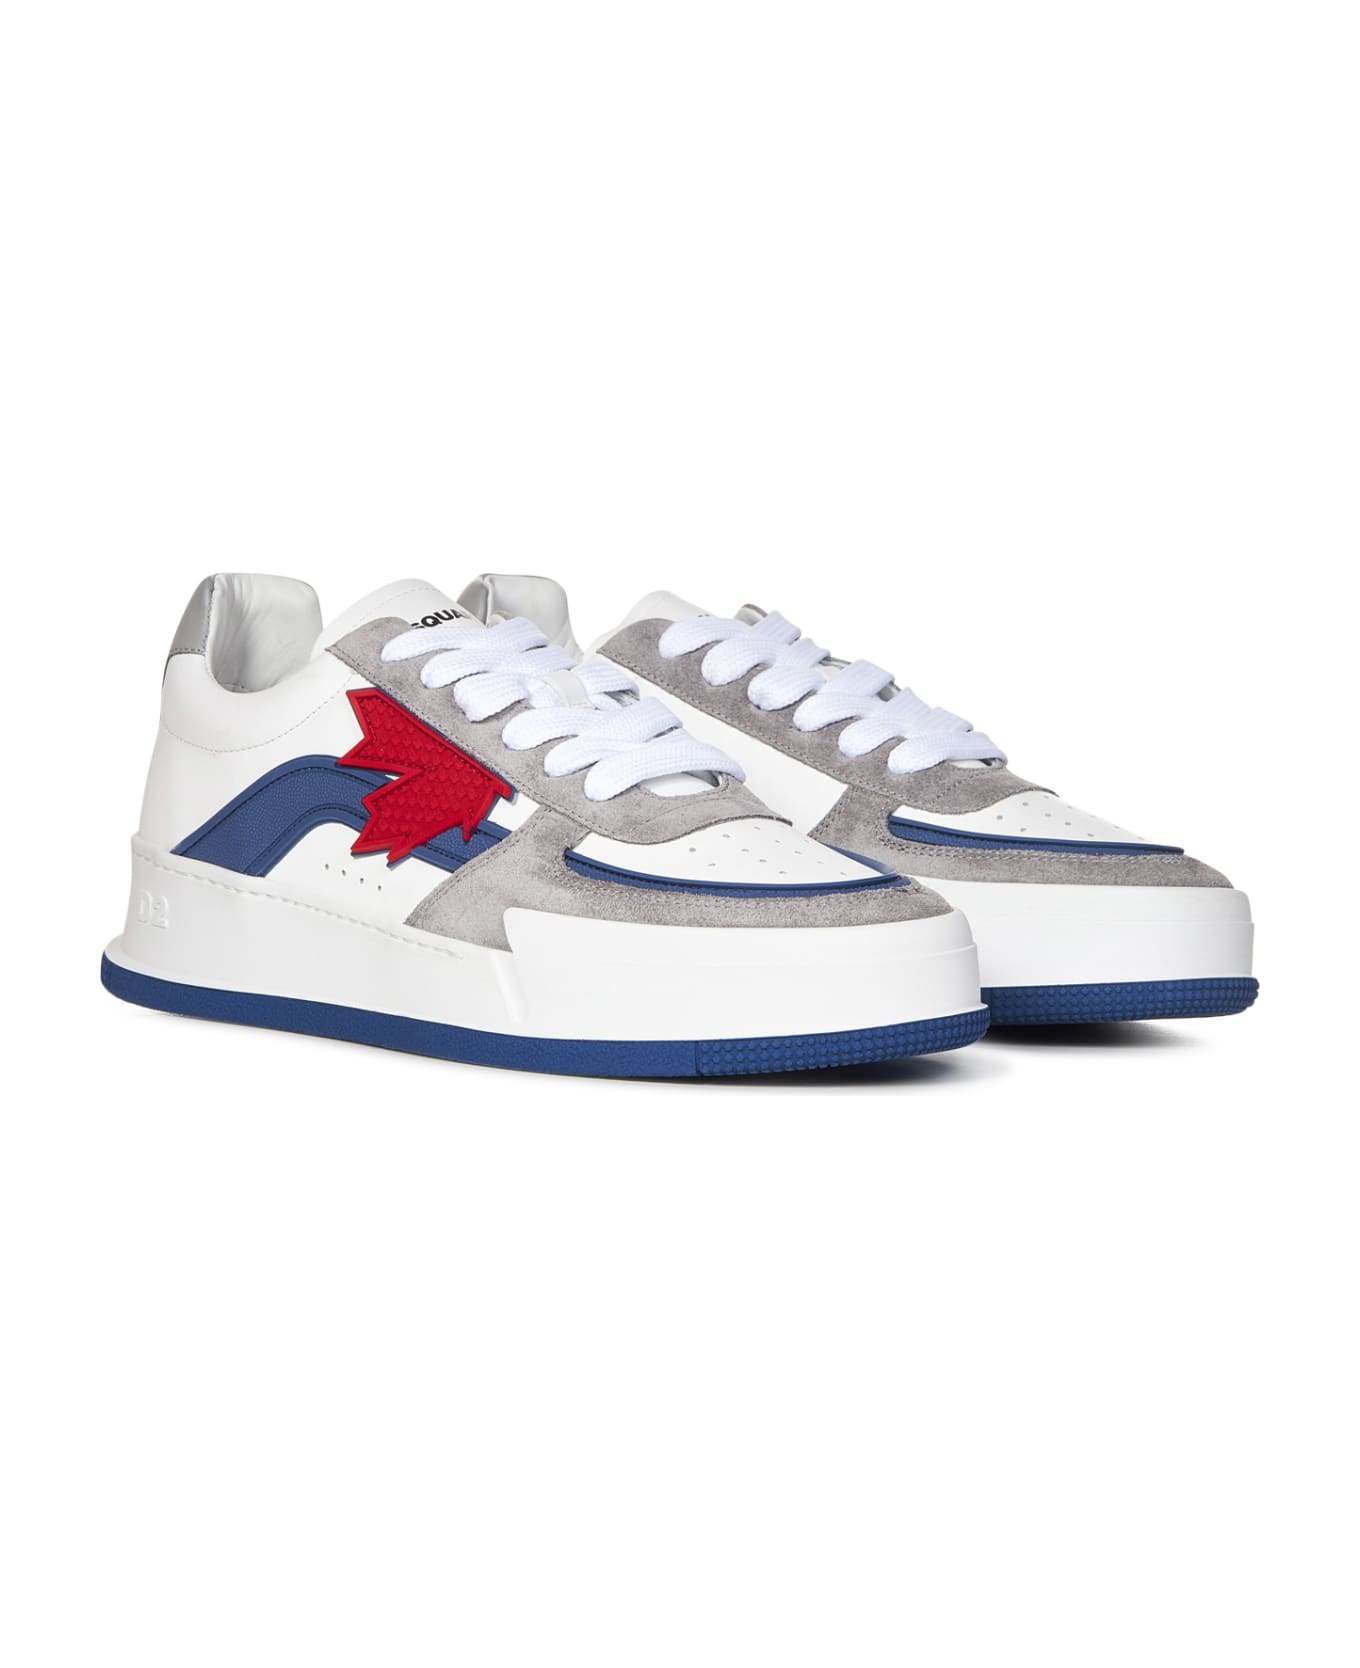 Dsquared2 Canadian Sneakers - White スニーカー